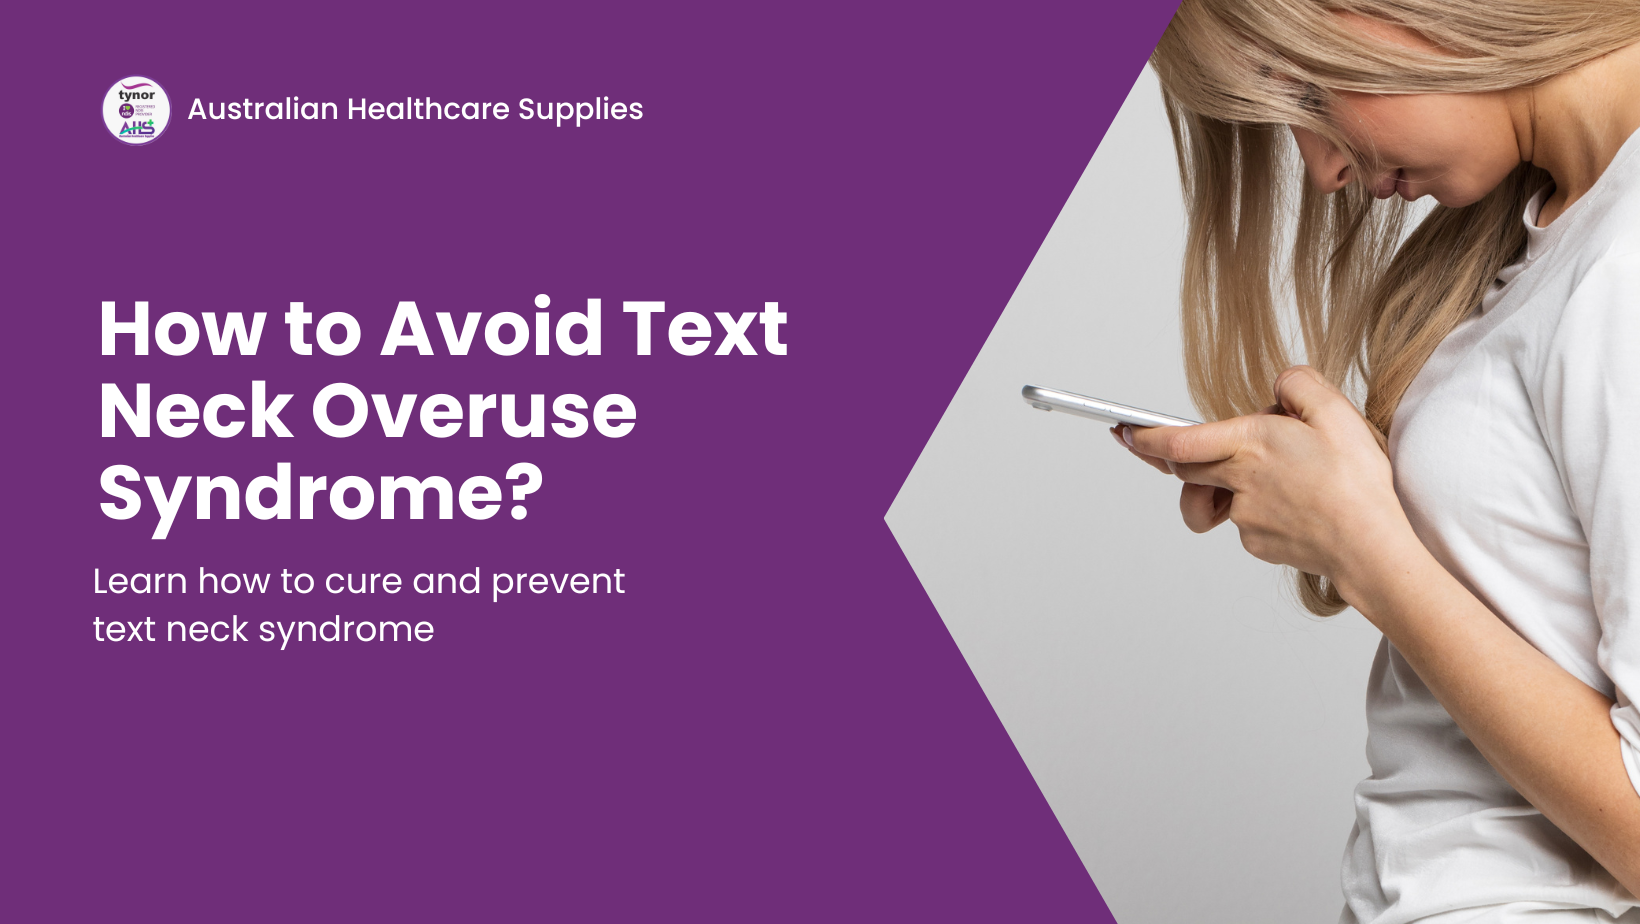 How to Avoid Text Neck Overuse Syndrome